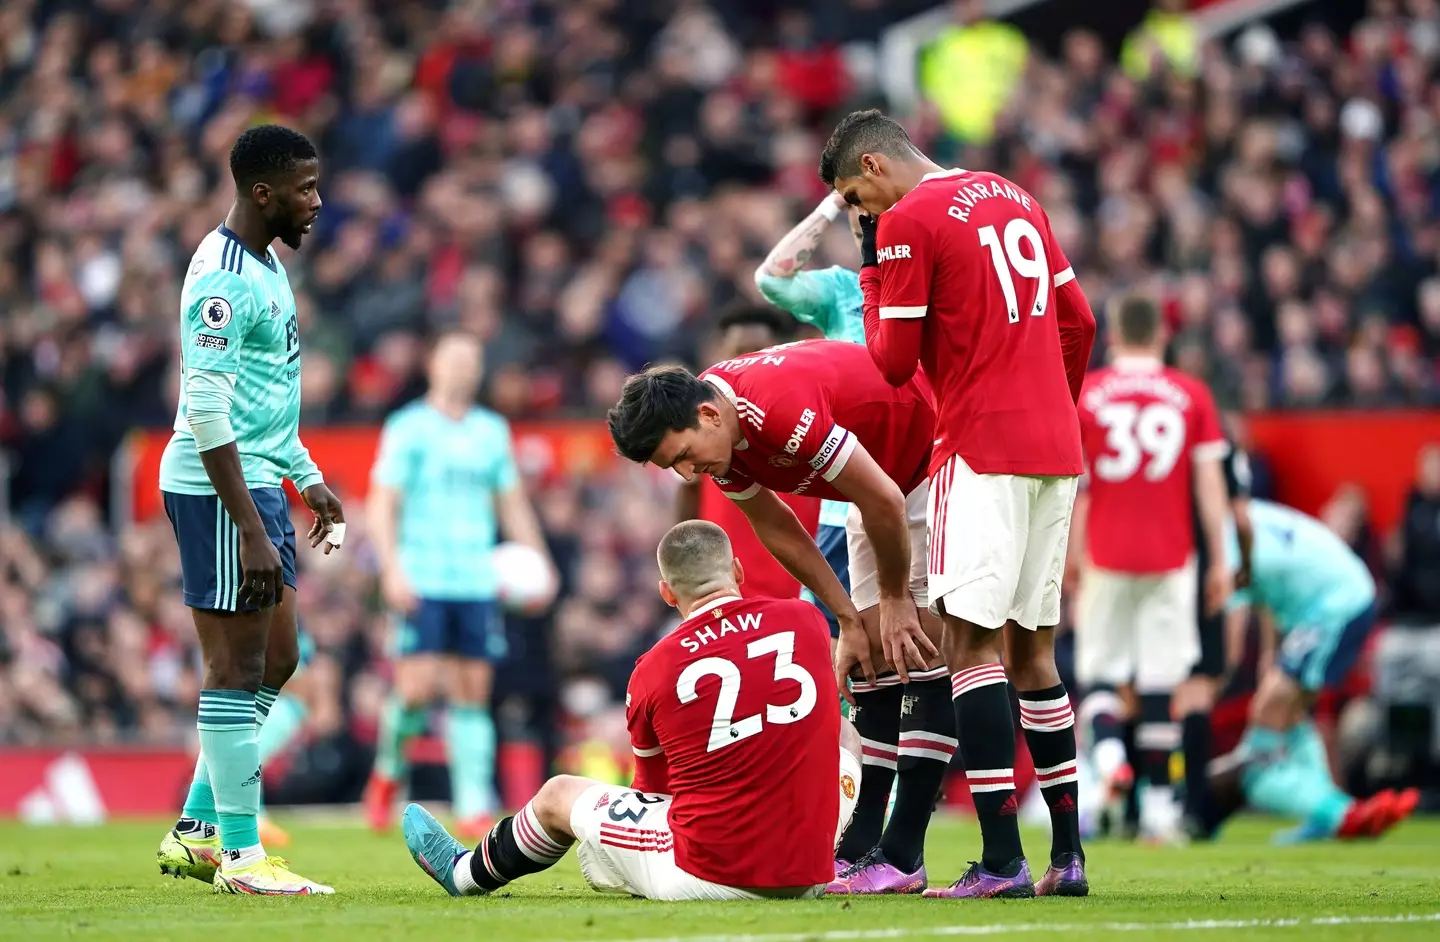 Shaw was forced off with an injury against Leicester (Image: PA)